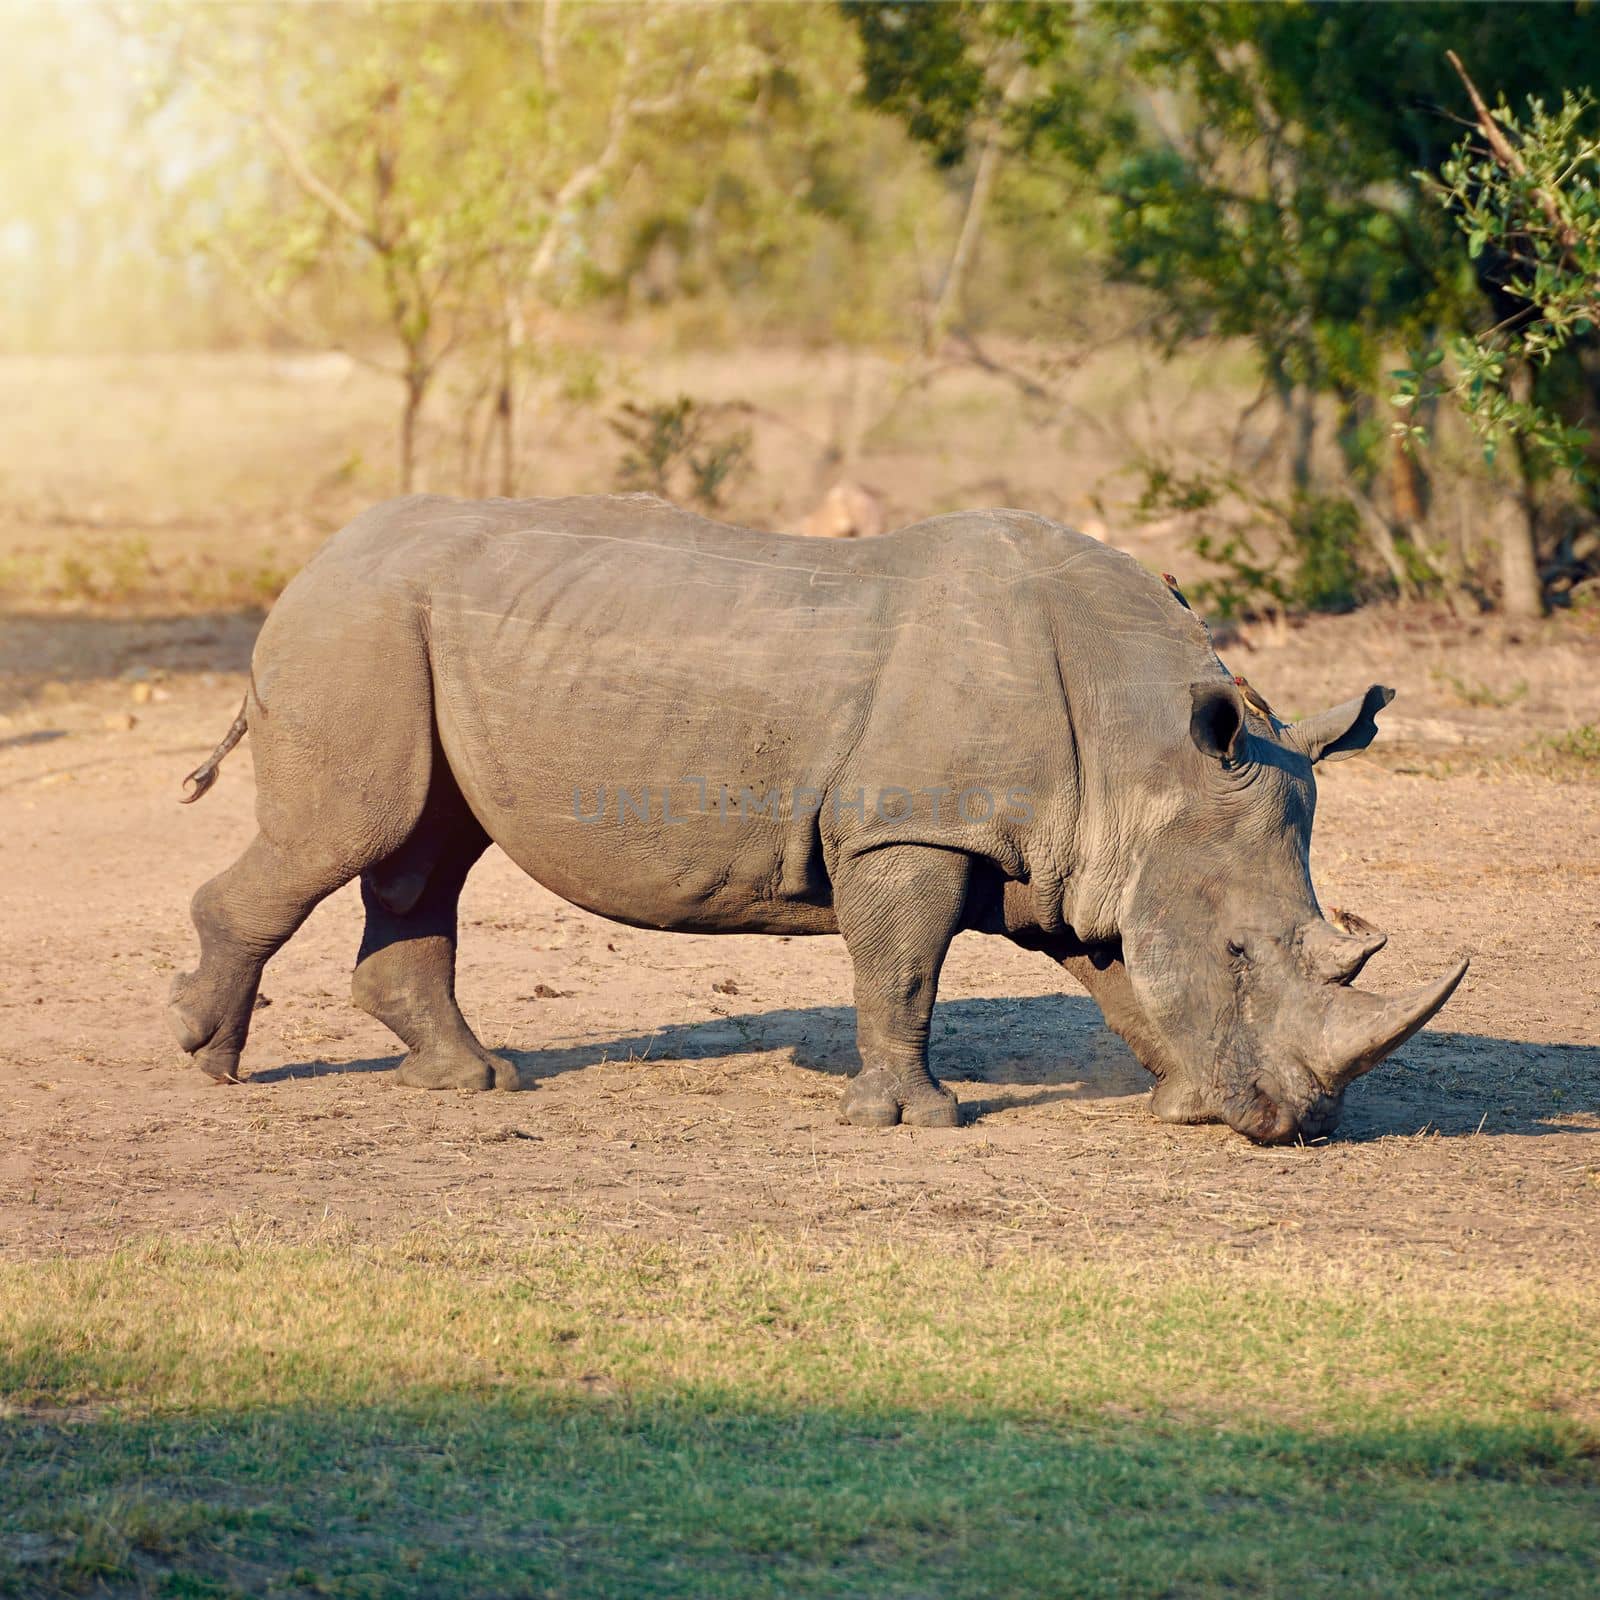 Its a great day to be a rhino. Full length shot of a rhinoceros in the wild